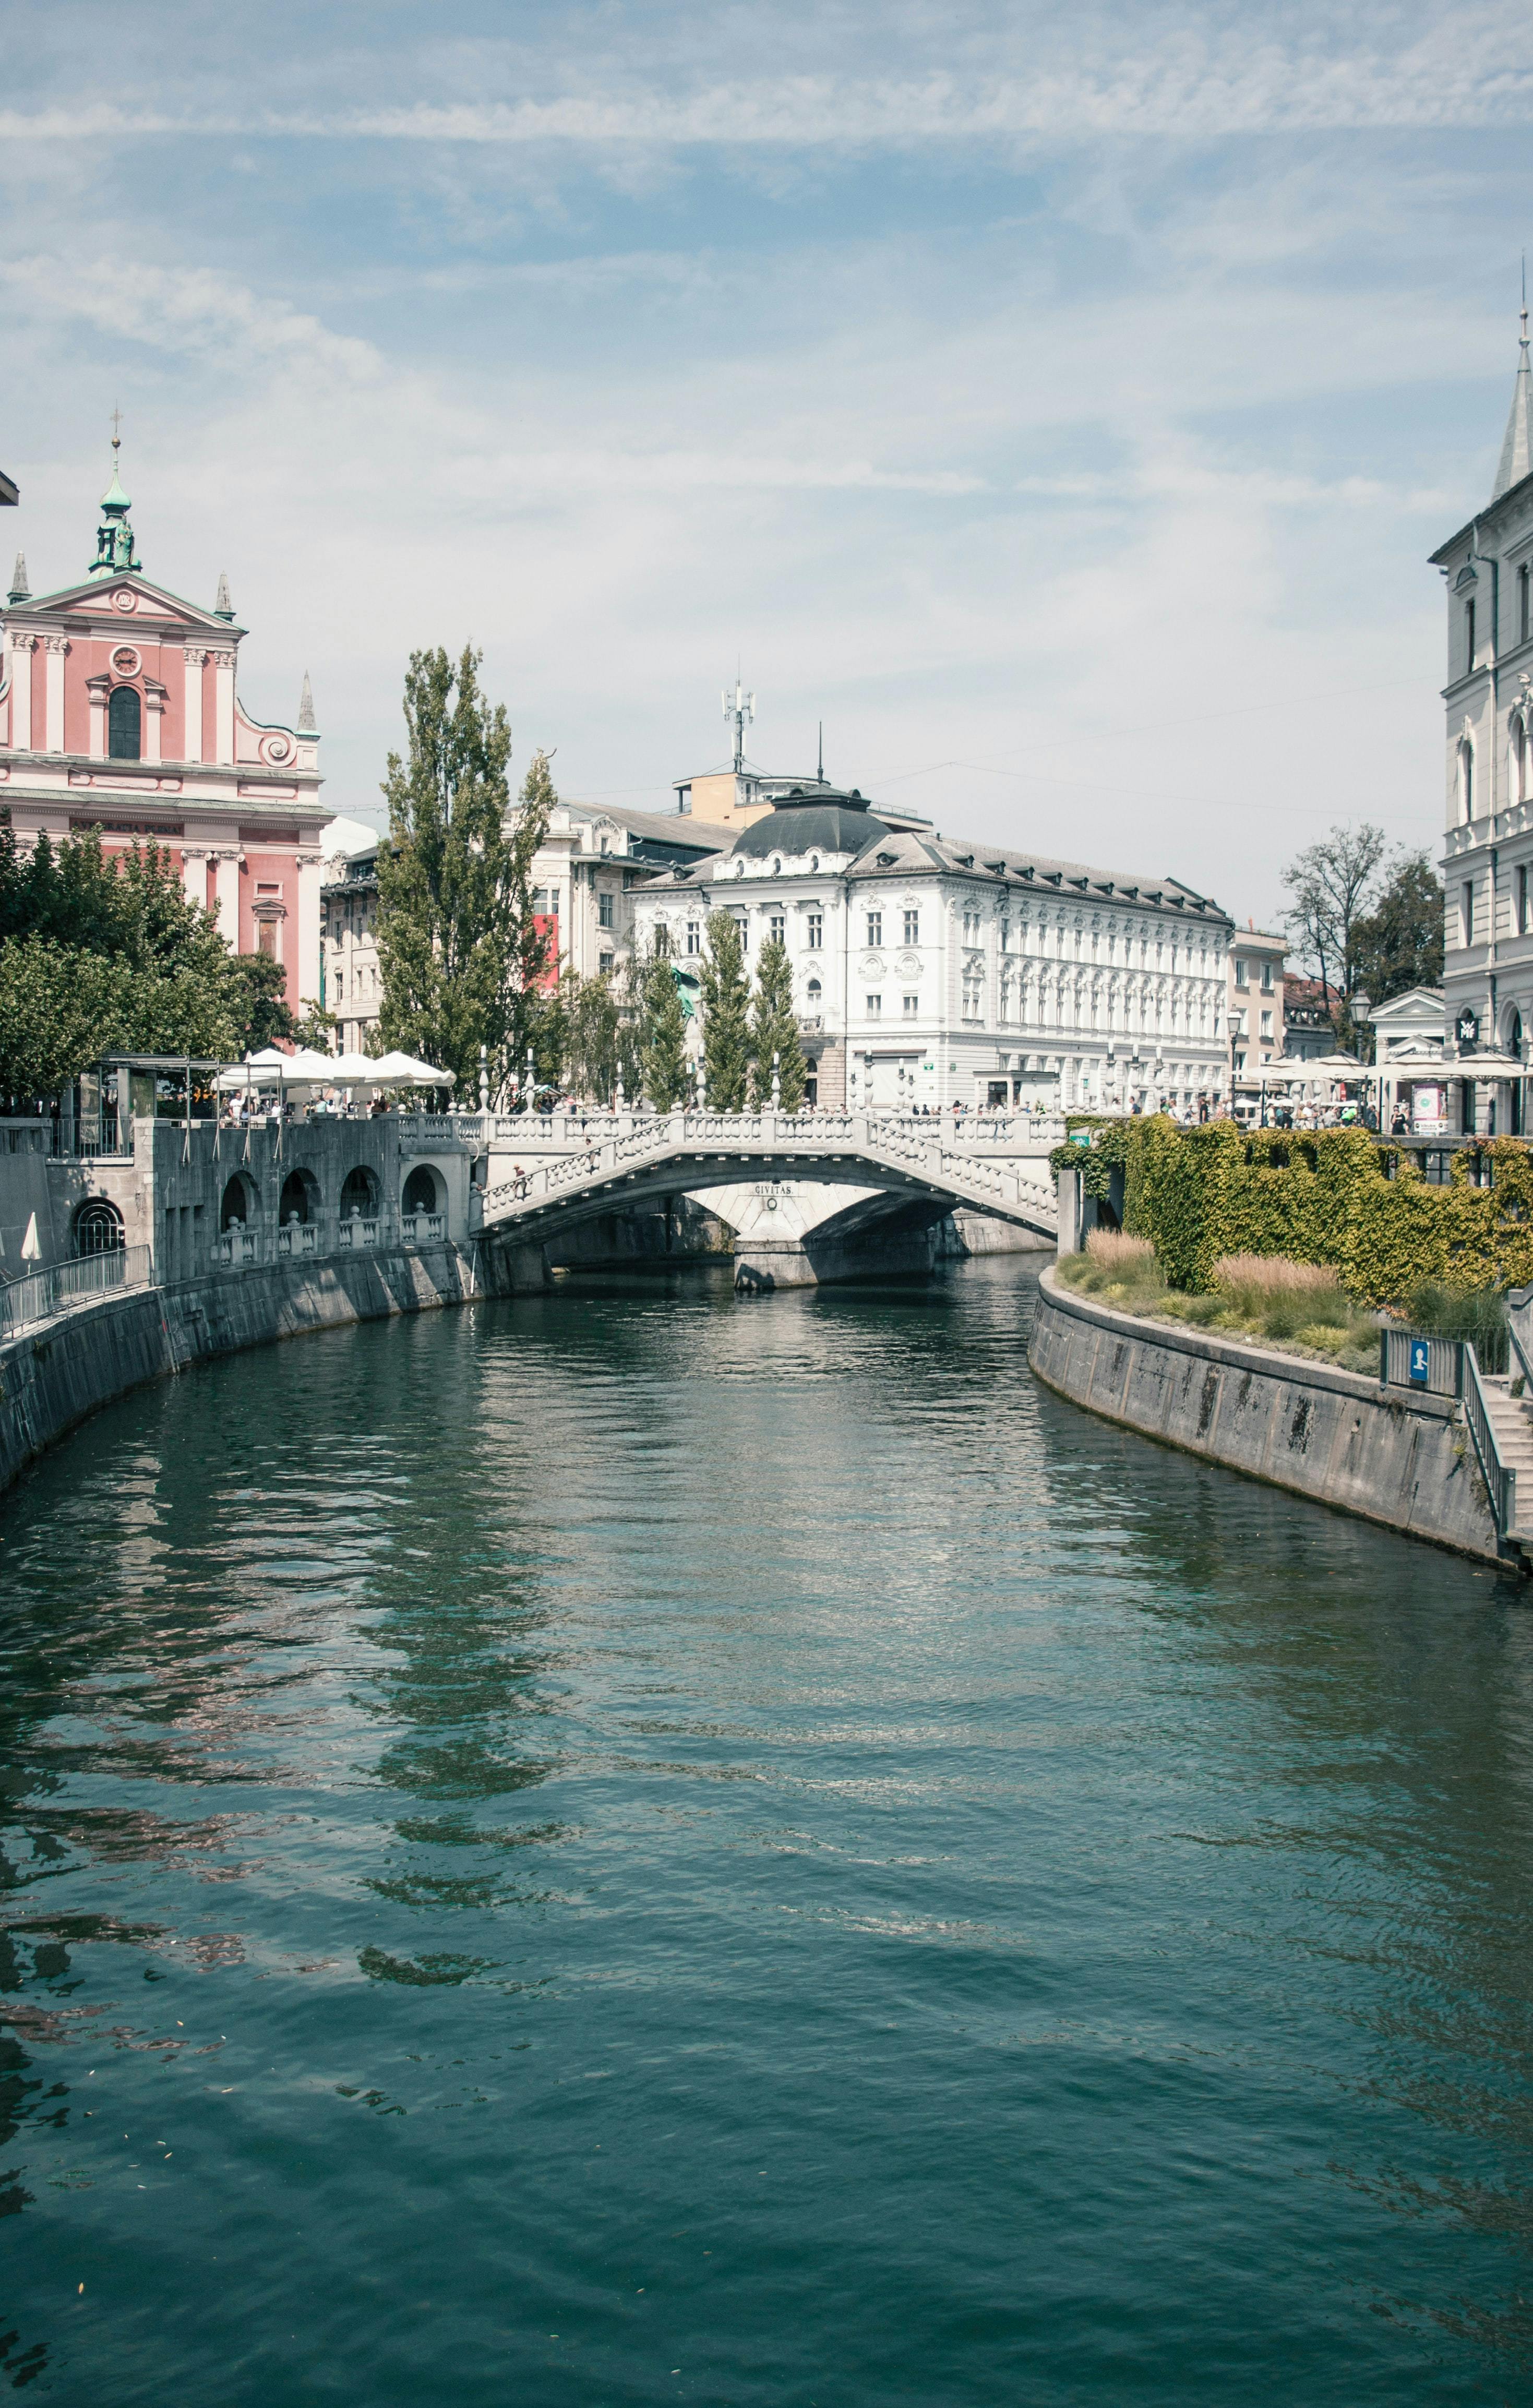 Discover Ljubljana's most photogenic spots with a Local